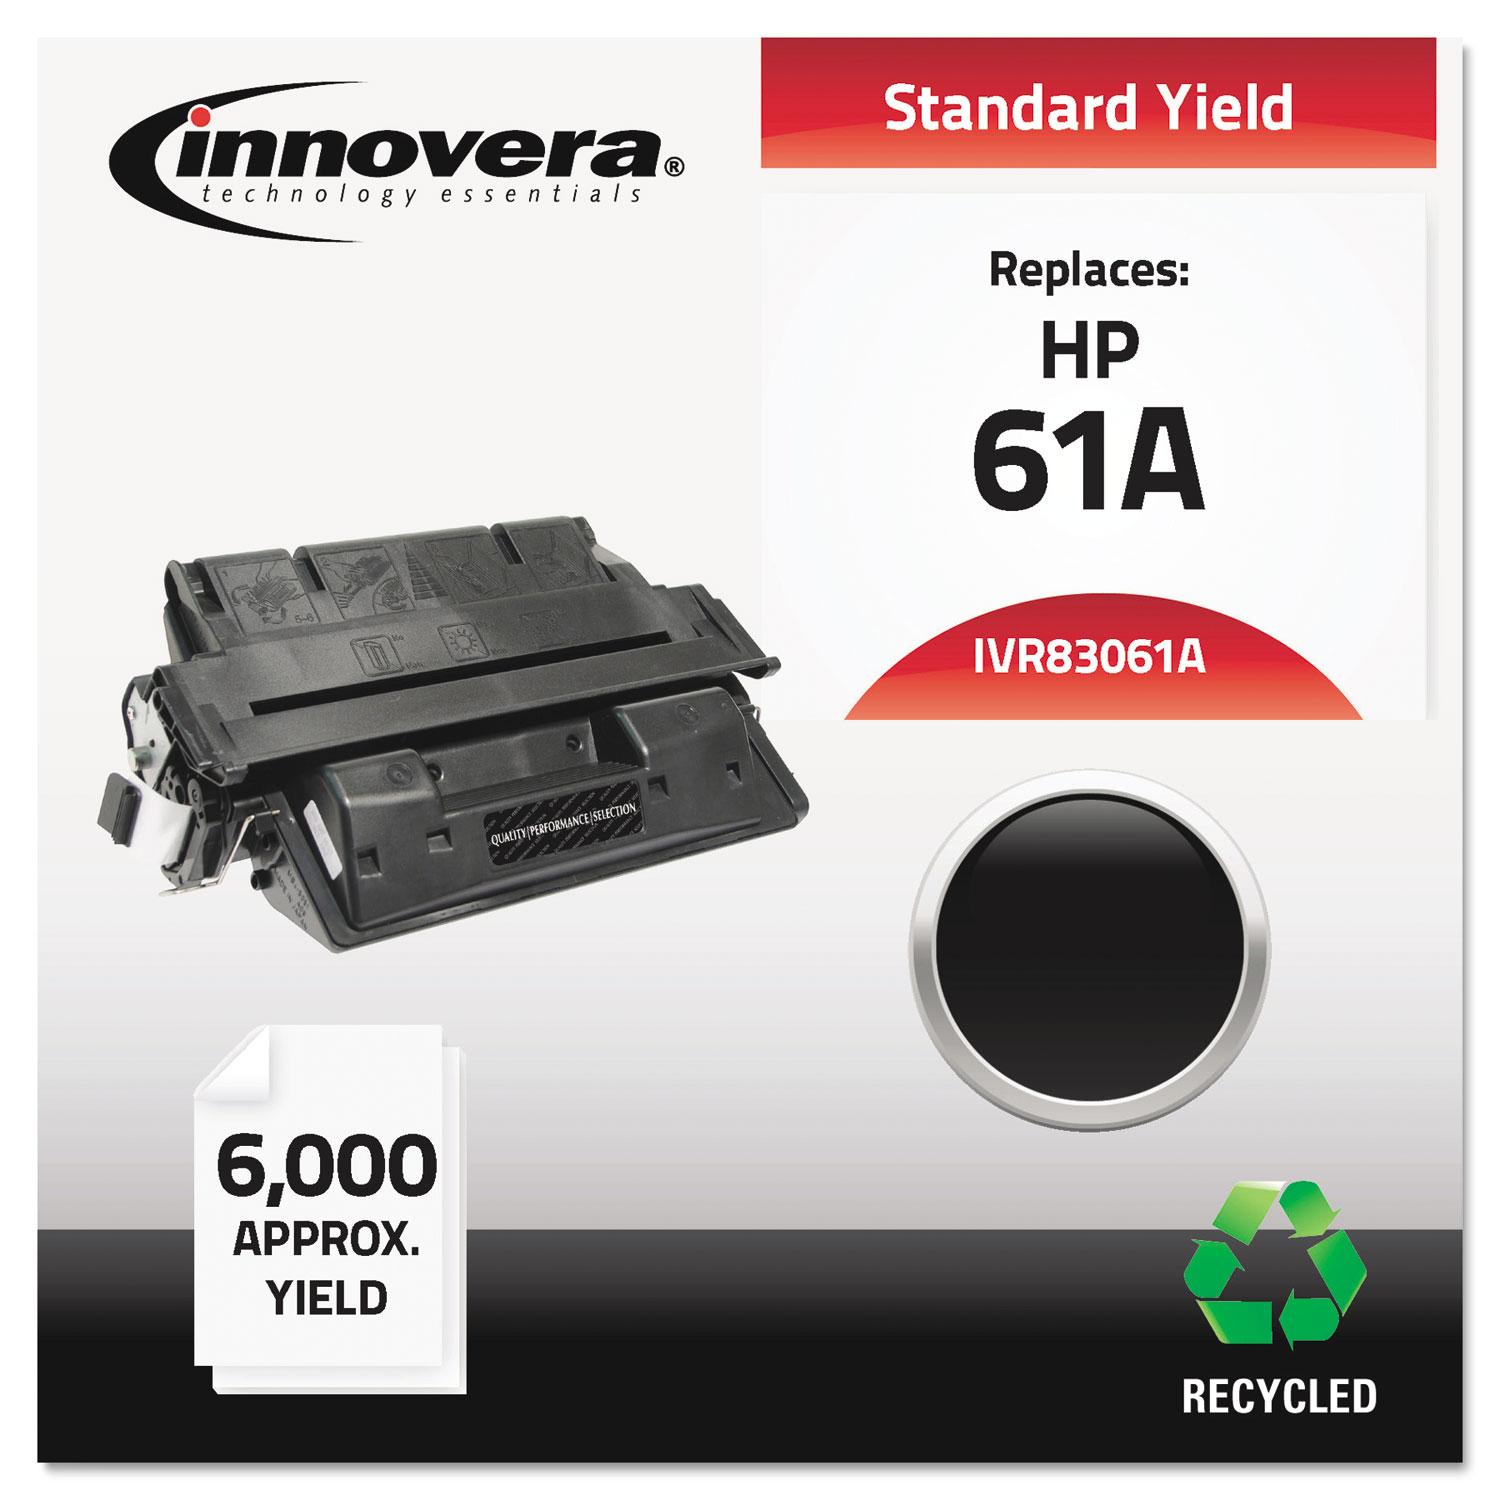  Innovera IVR83061A Remanufactured C8061A (61A) Toner, 6000 Page-Yield, Black (IVR83061A) 